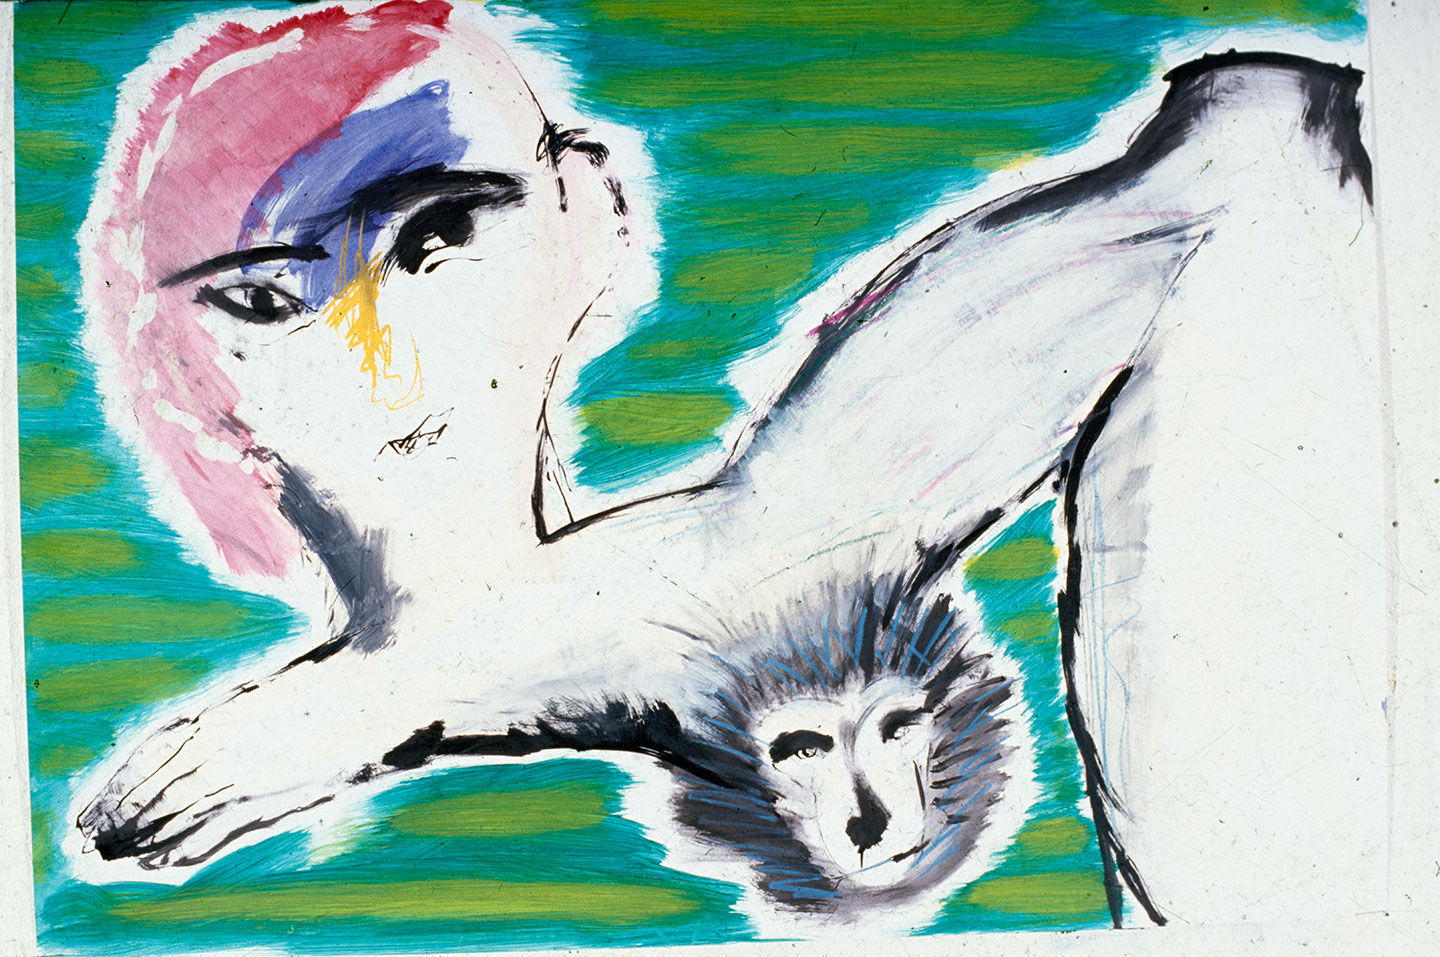 Title: Faces 9
Materials: Acrylic, Ink, Oil Pastel on paper
Size: 70x100 cm
Year: 1986